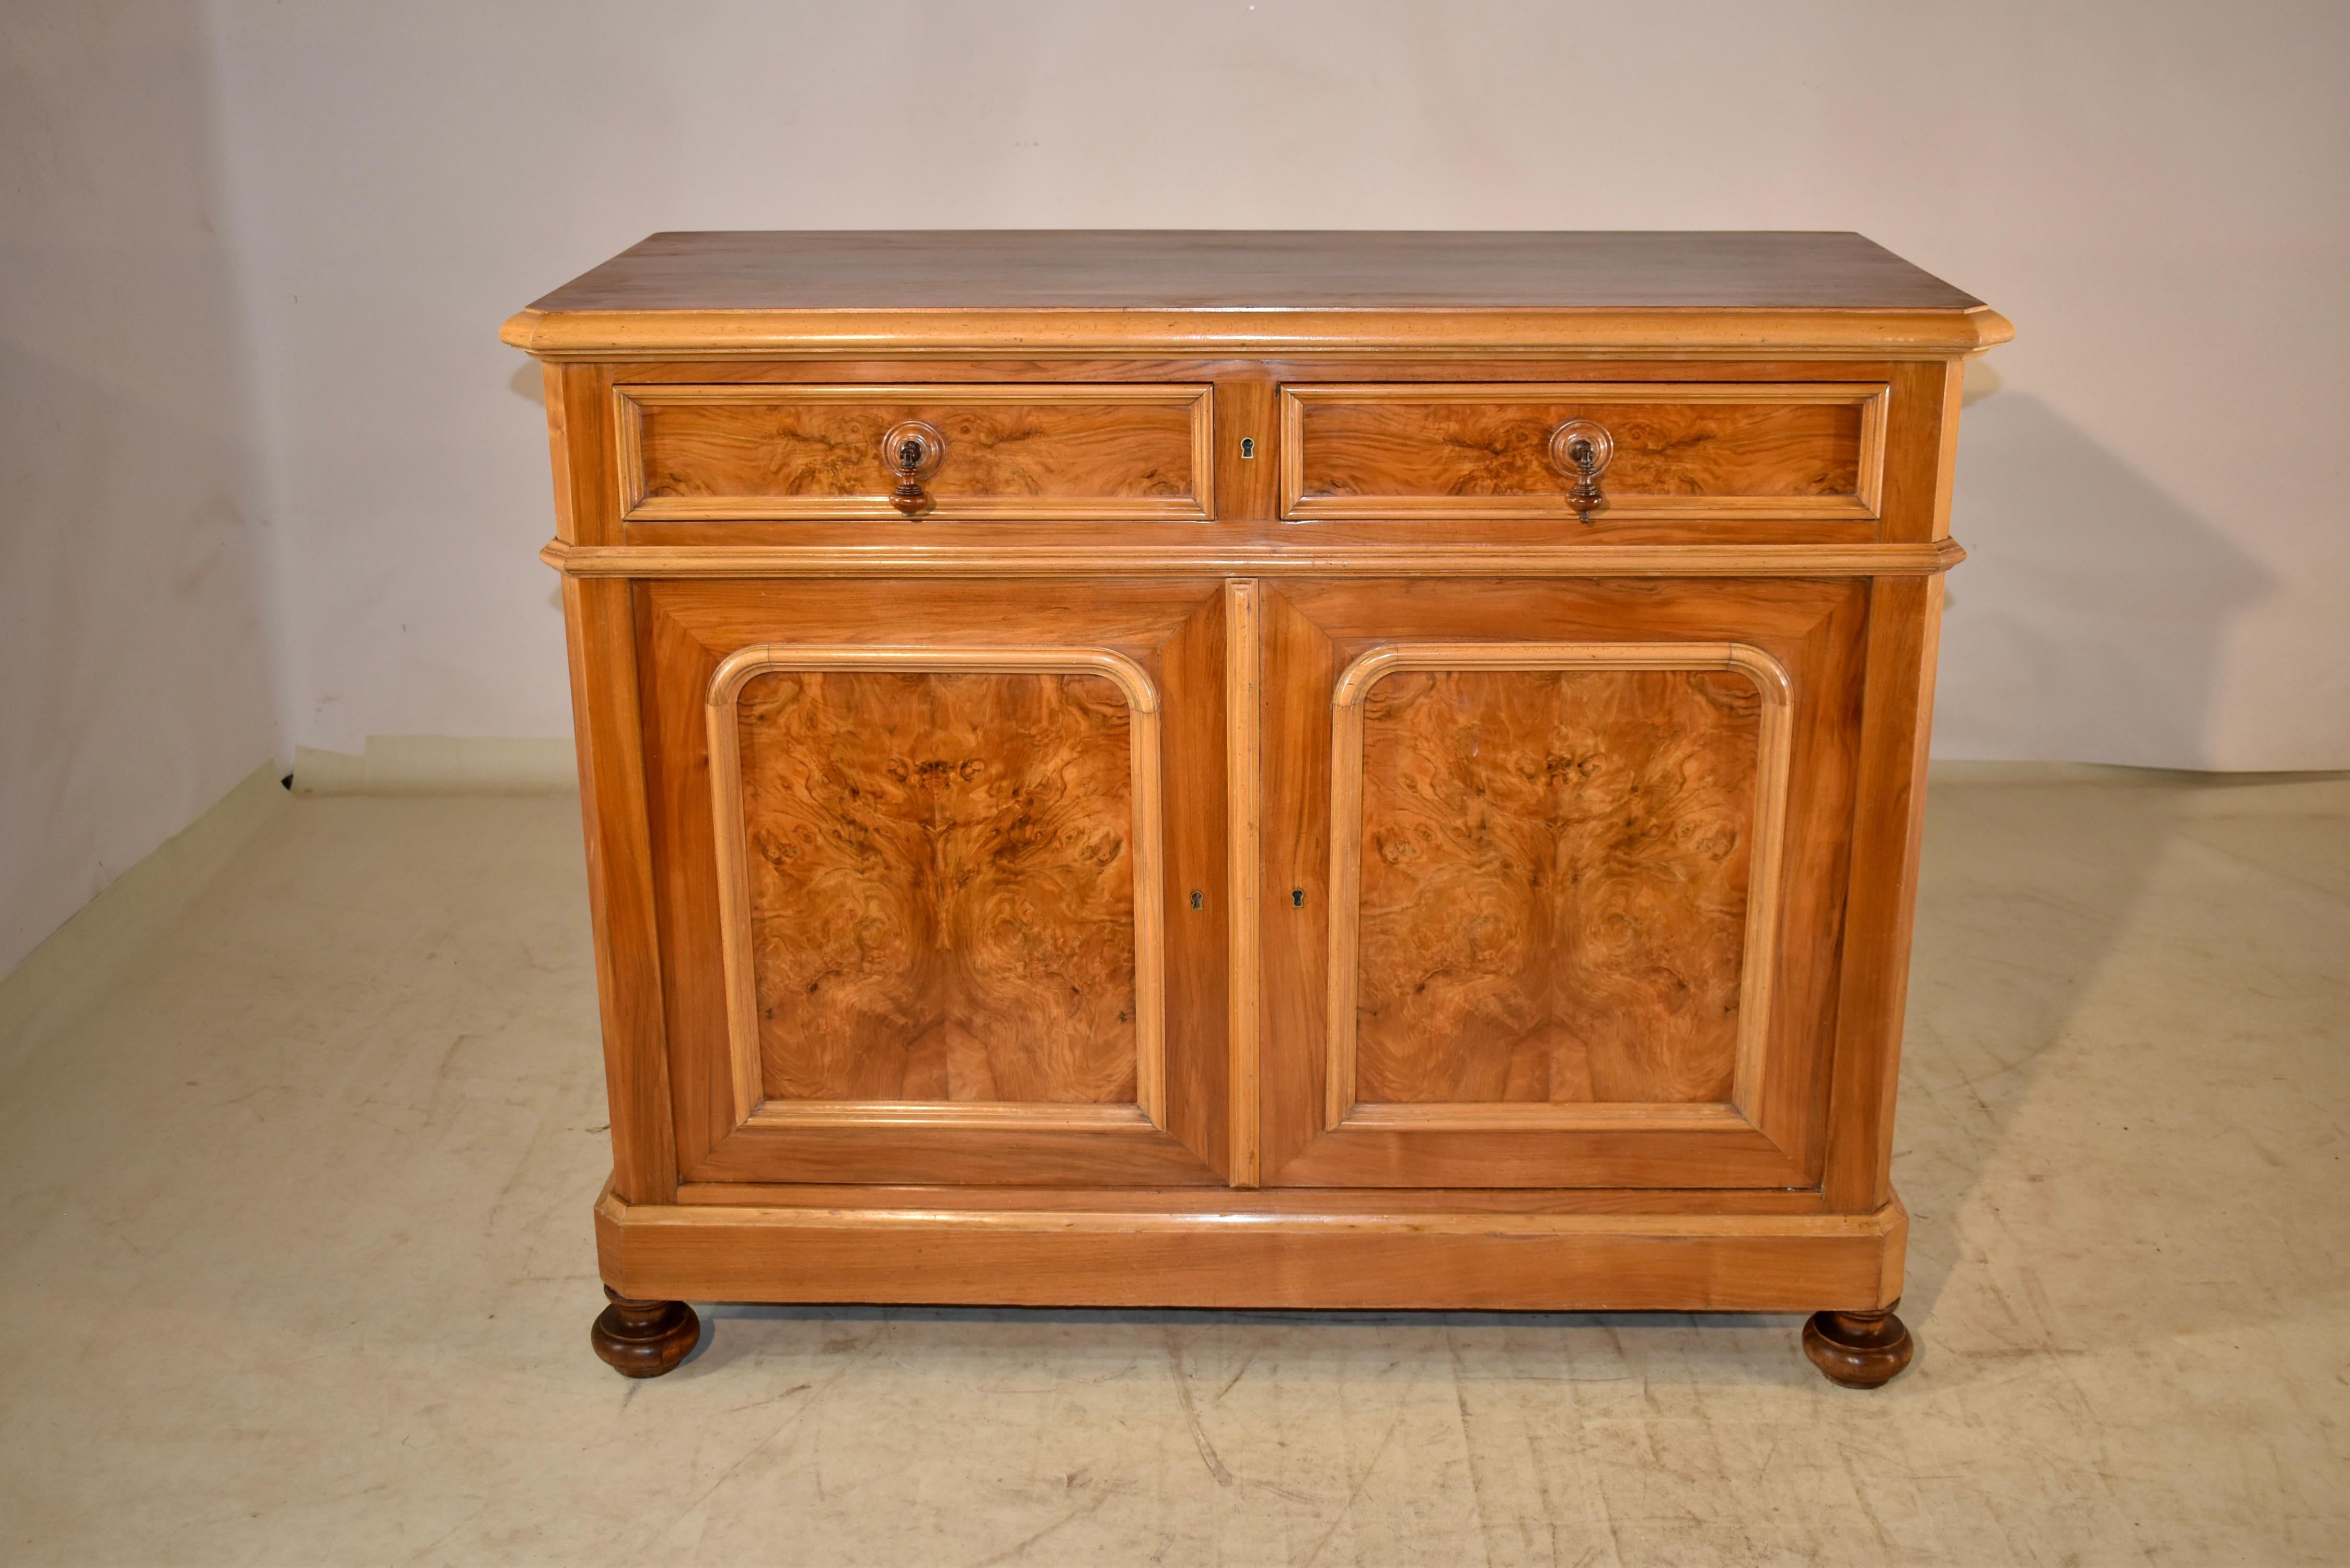 Unusual and wonderful 19th century Louis Philippe buffet made from several different woods for gorgeous contrasting detail. The entire case is made from spectacular rosewood. The top is banded in maple with a shaped and beveled edge. The sides of